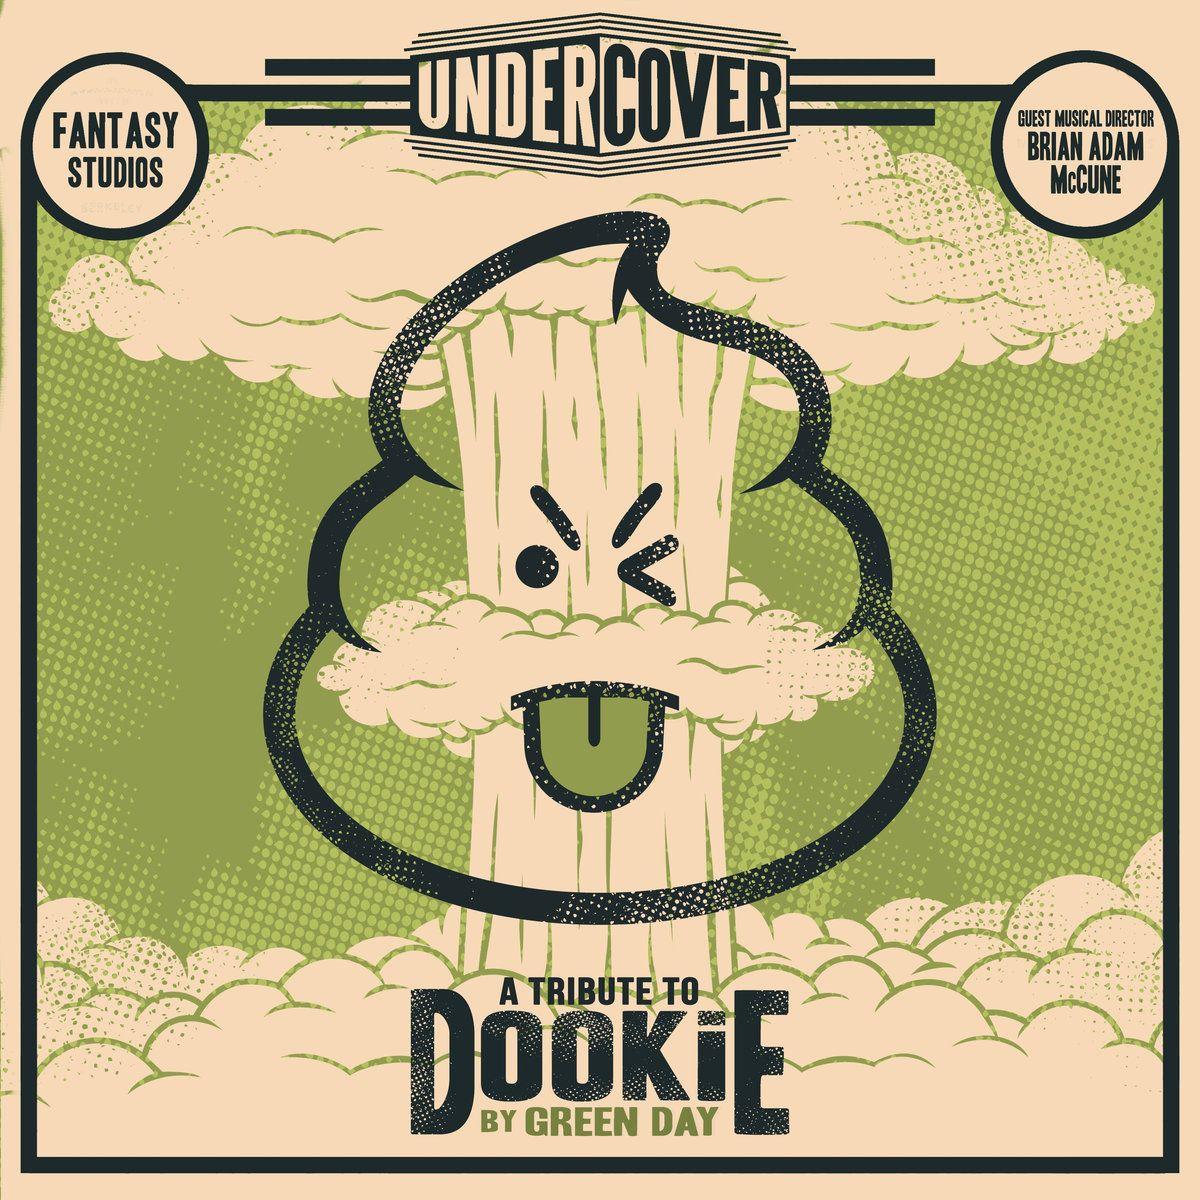 Green Day Dookie Logo - UnderCover Presents: A Tribute to Green Day's Dookie | UnderCover ...